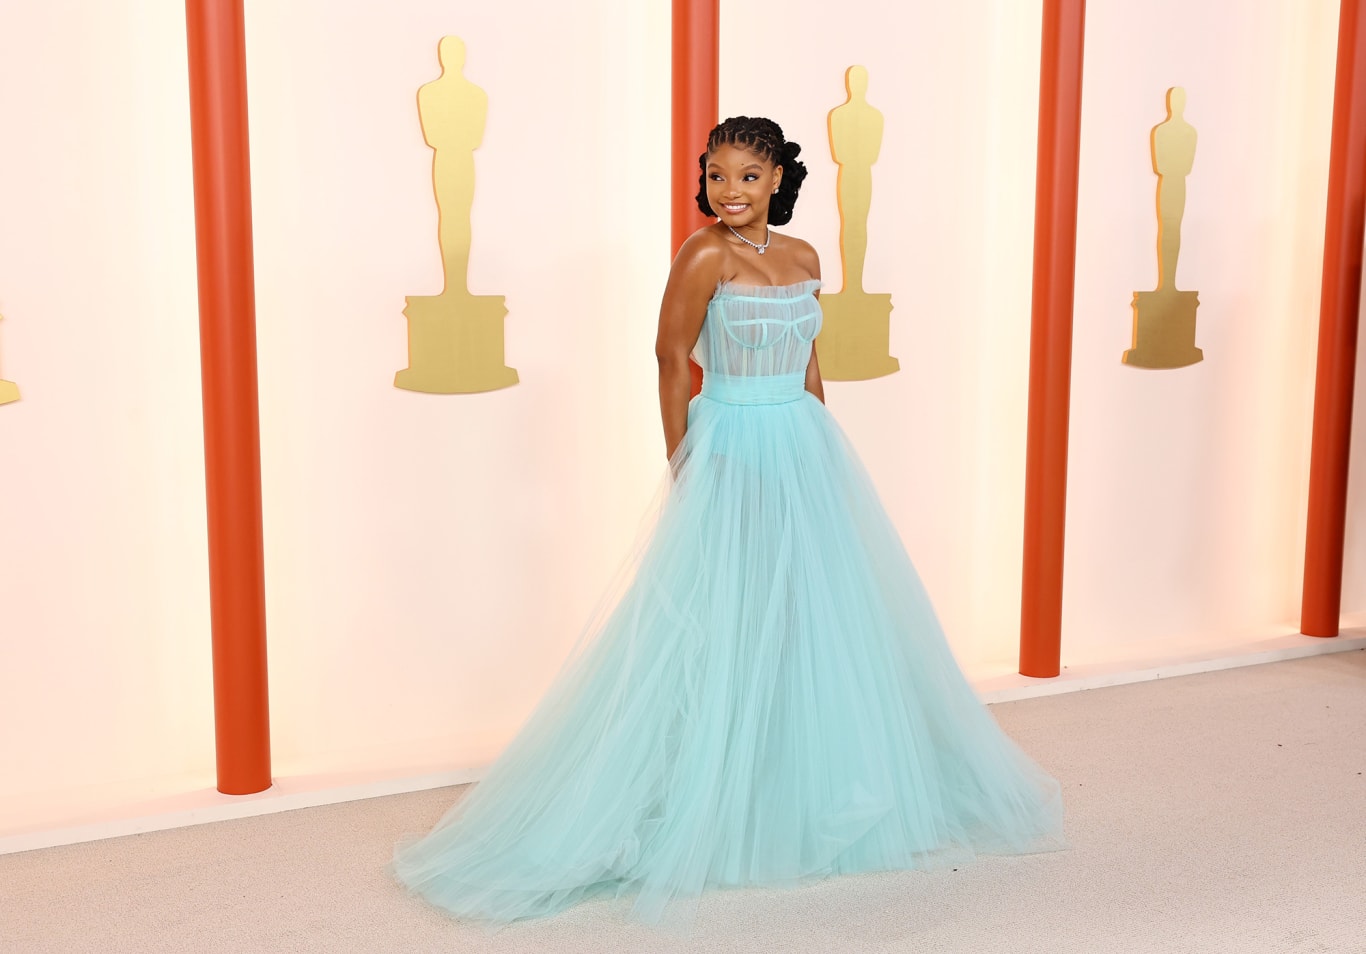 Halle Bailey wore an aqua-colored Dolce & Gabbana princess dress with De Beers jewelry. 